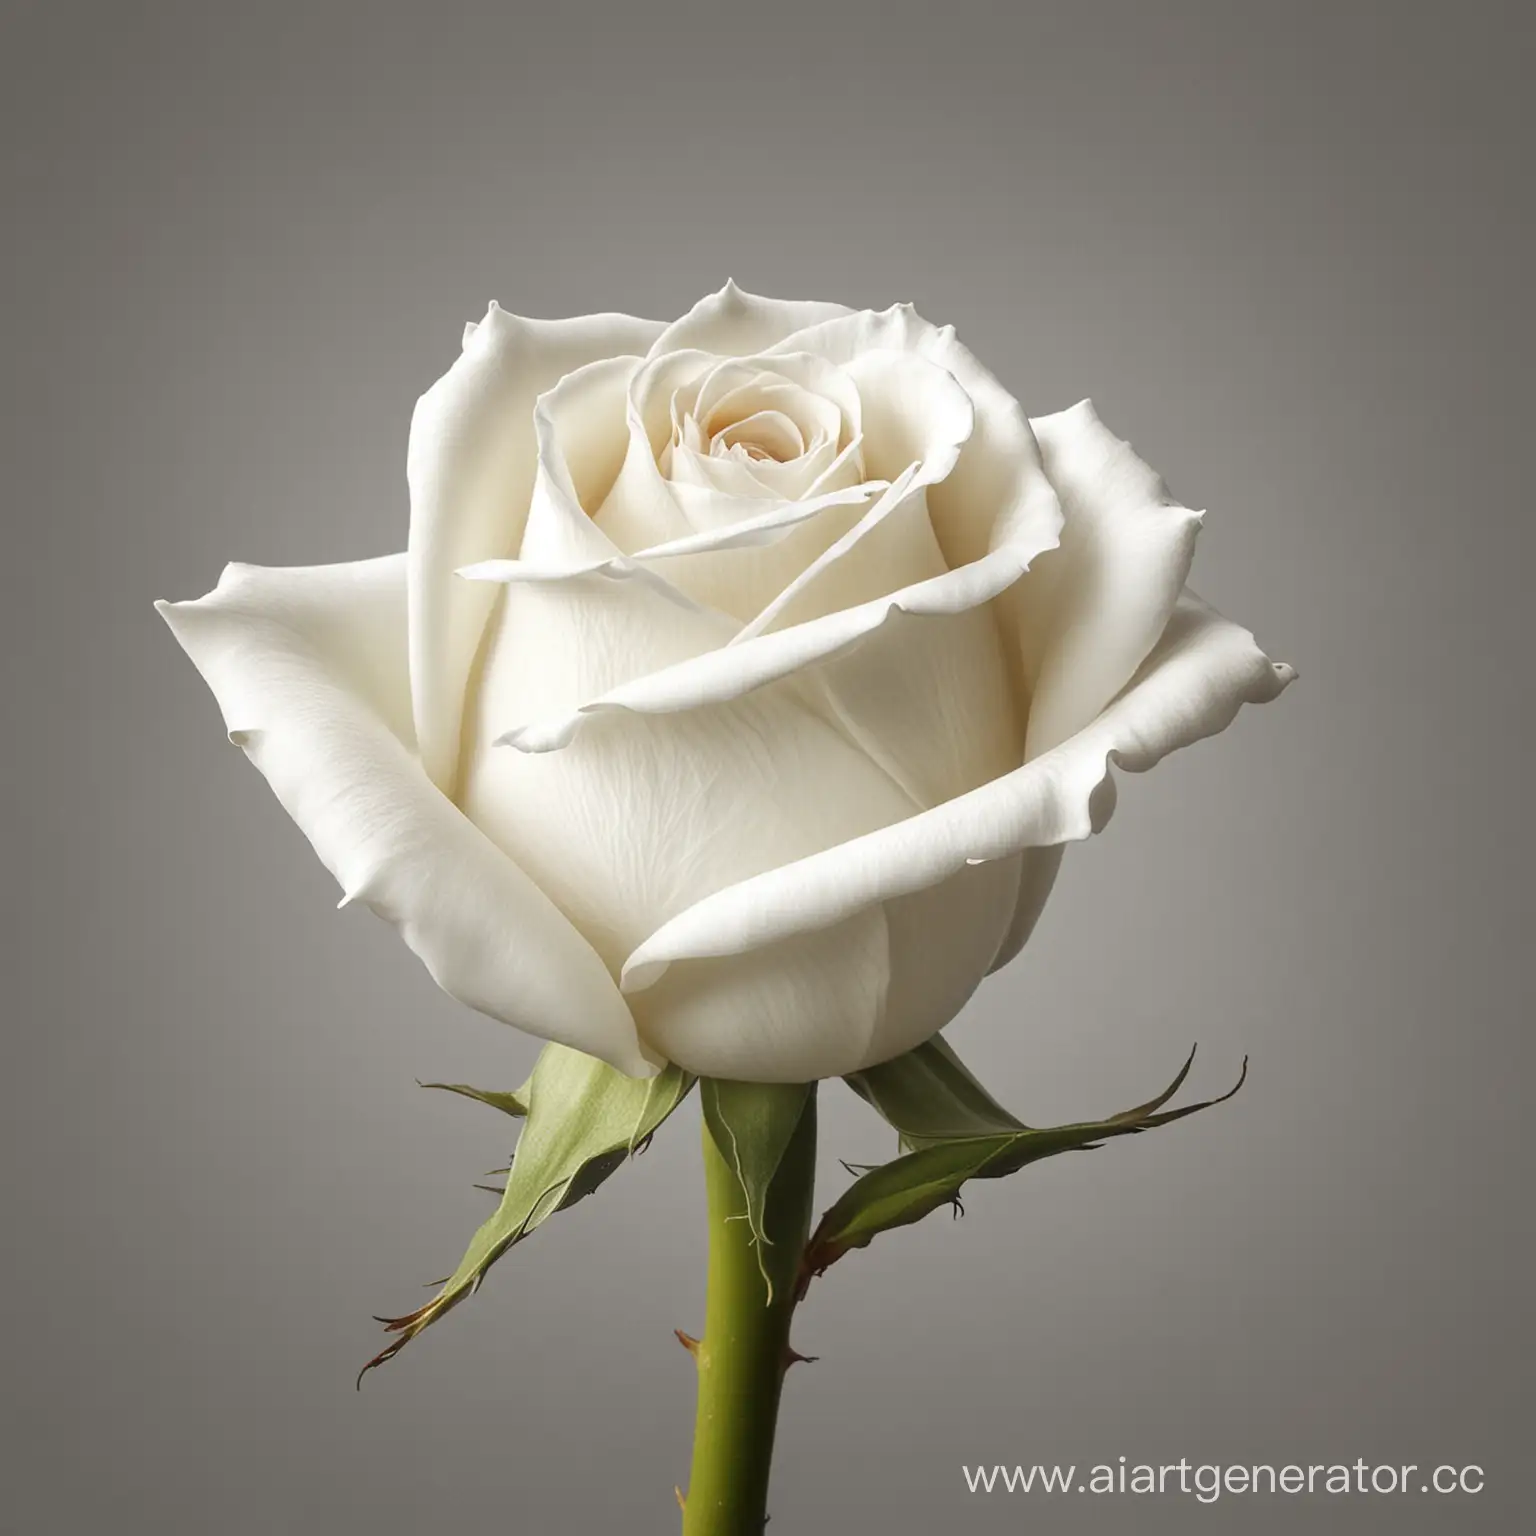 Exquisite-Lush-White-Rose-Bud-Blossoming-in-Radiant-Bloom